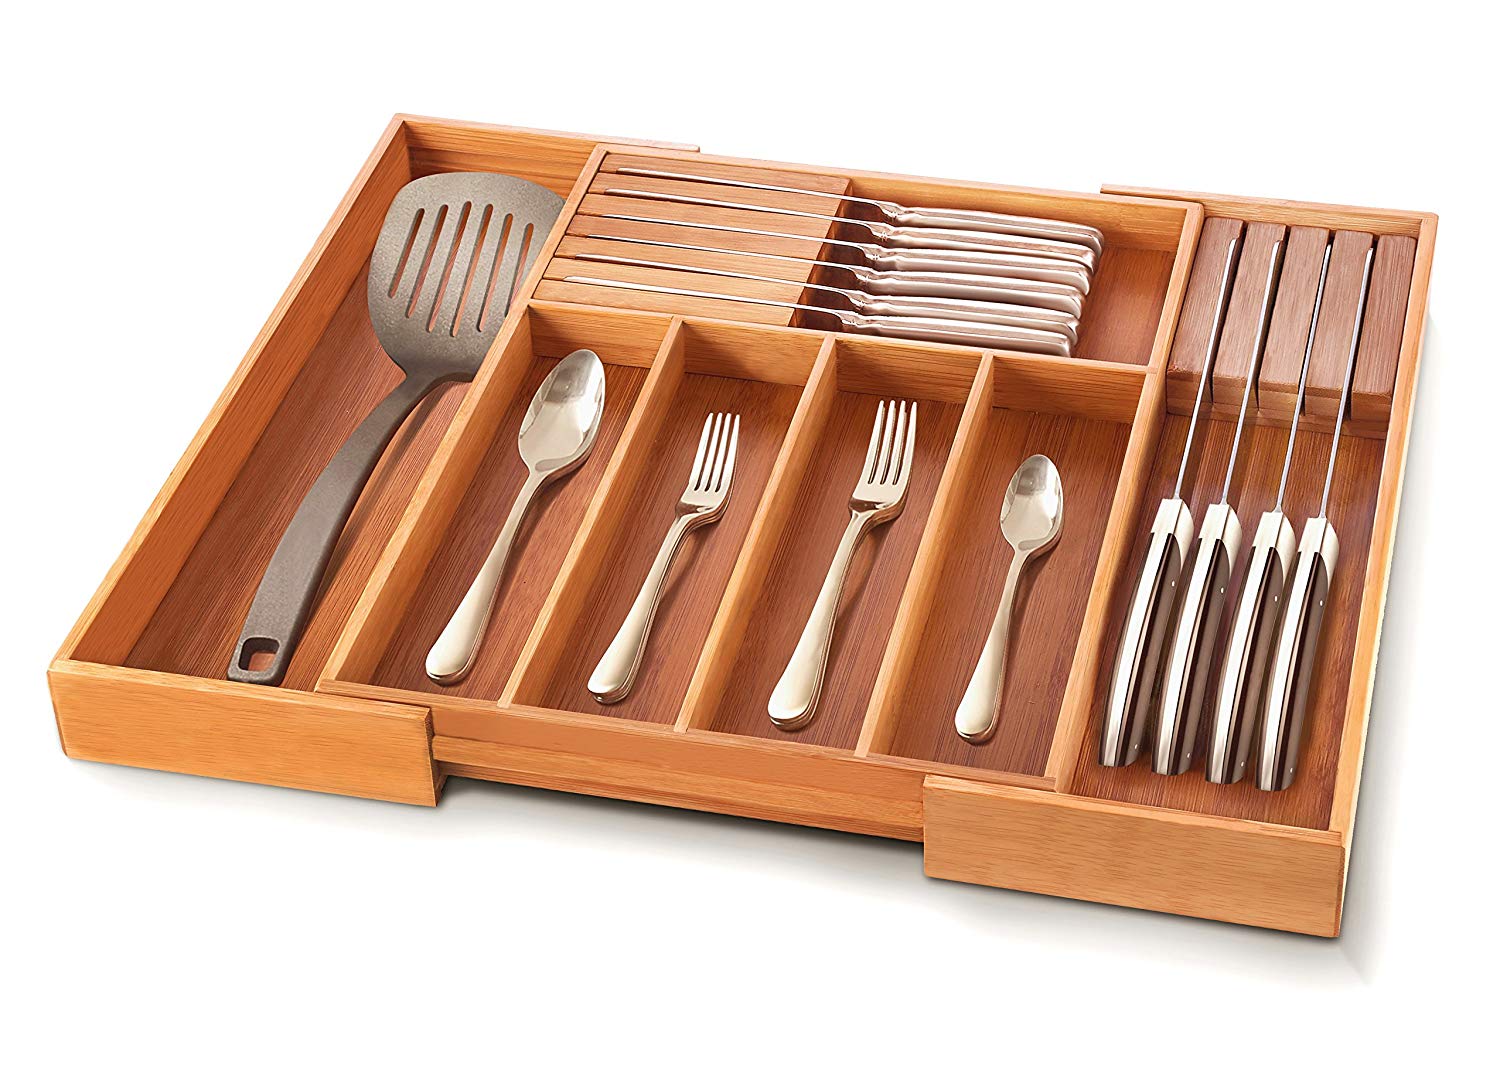 Bamboo Utensil Drawer Organizer - Expandable Cutlery Tray Silverware Holder with 2 Removable Knife Blocks